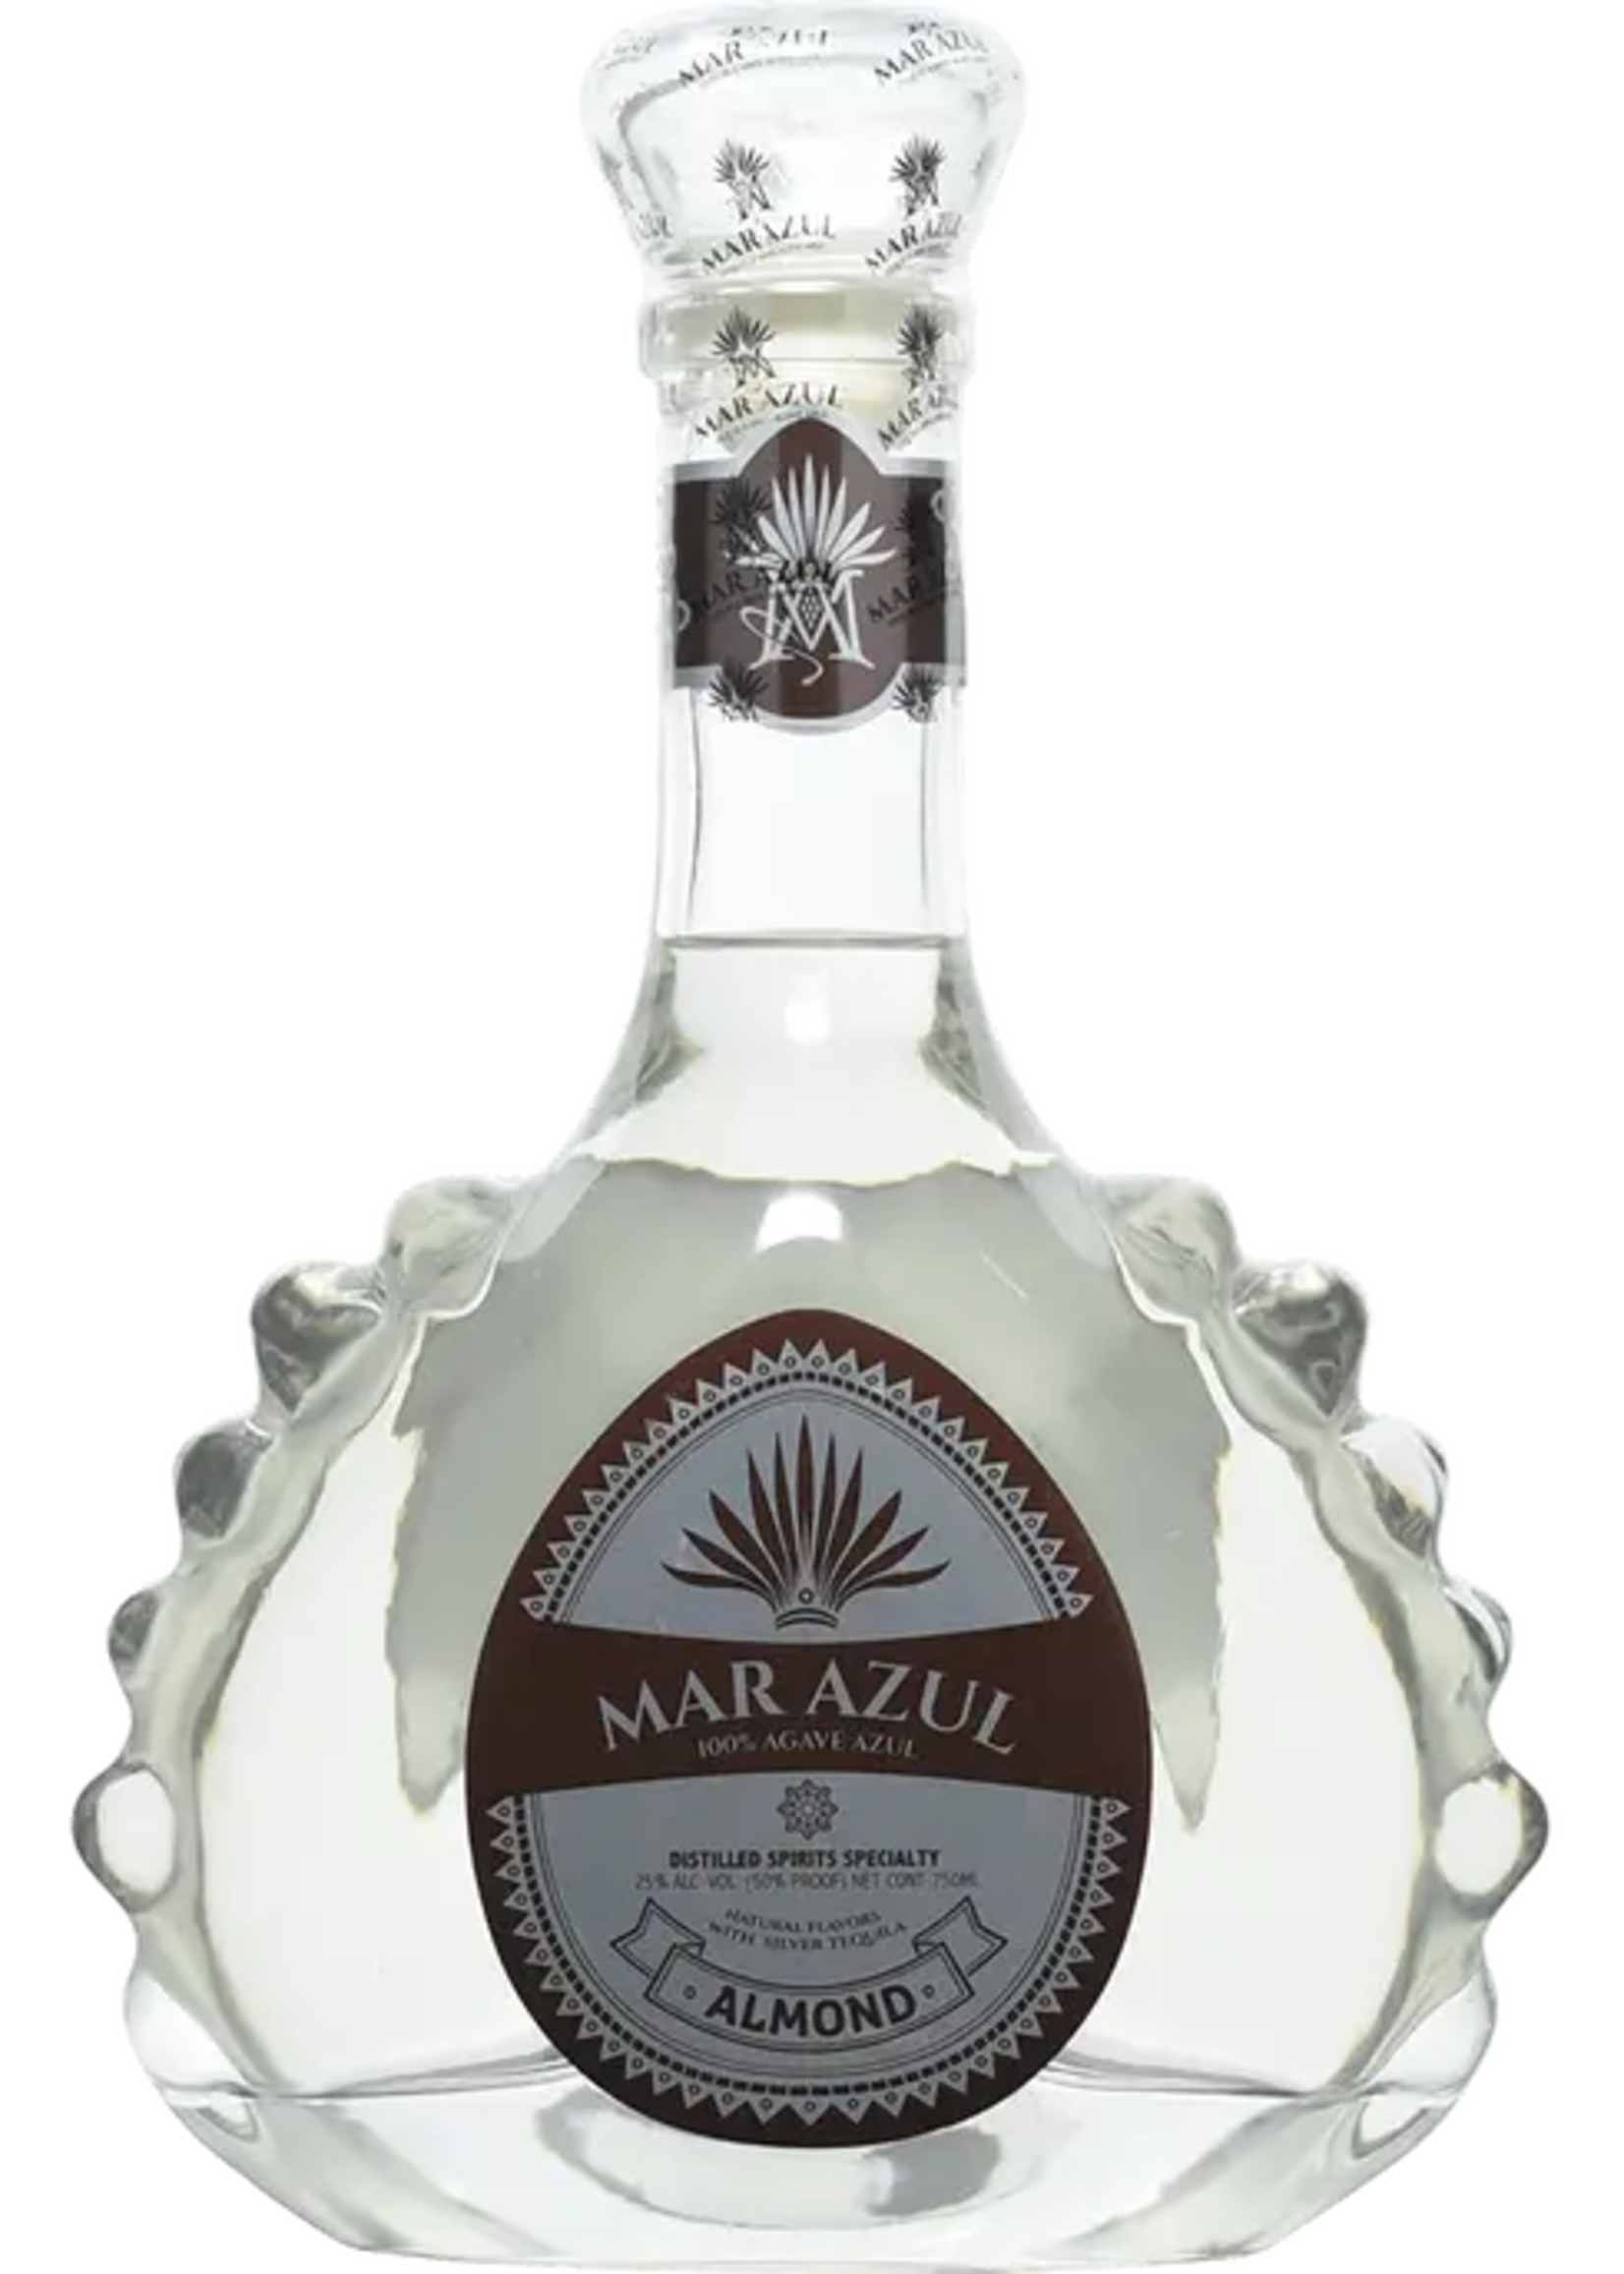 Mar Azul Almond Flavored Tequila 50Proof 750ml